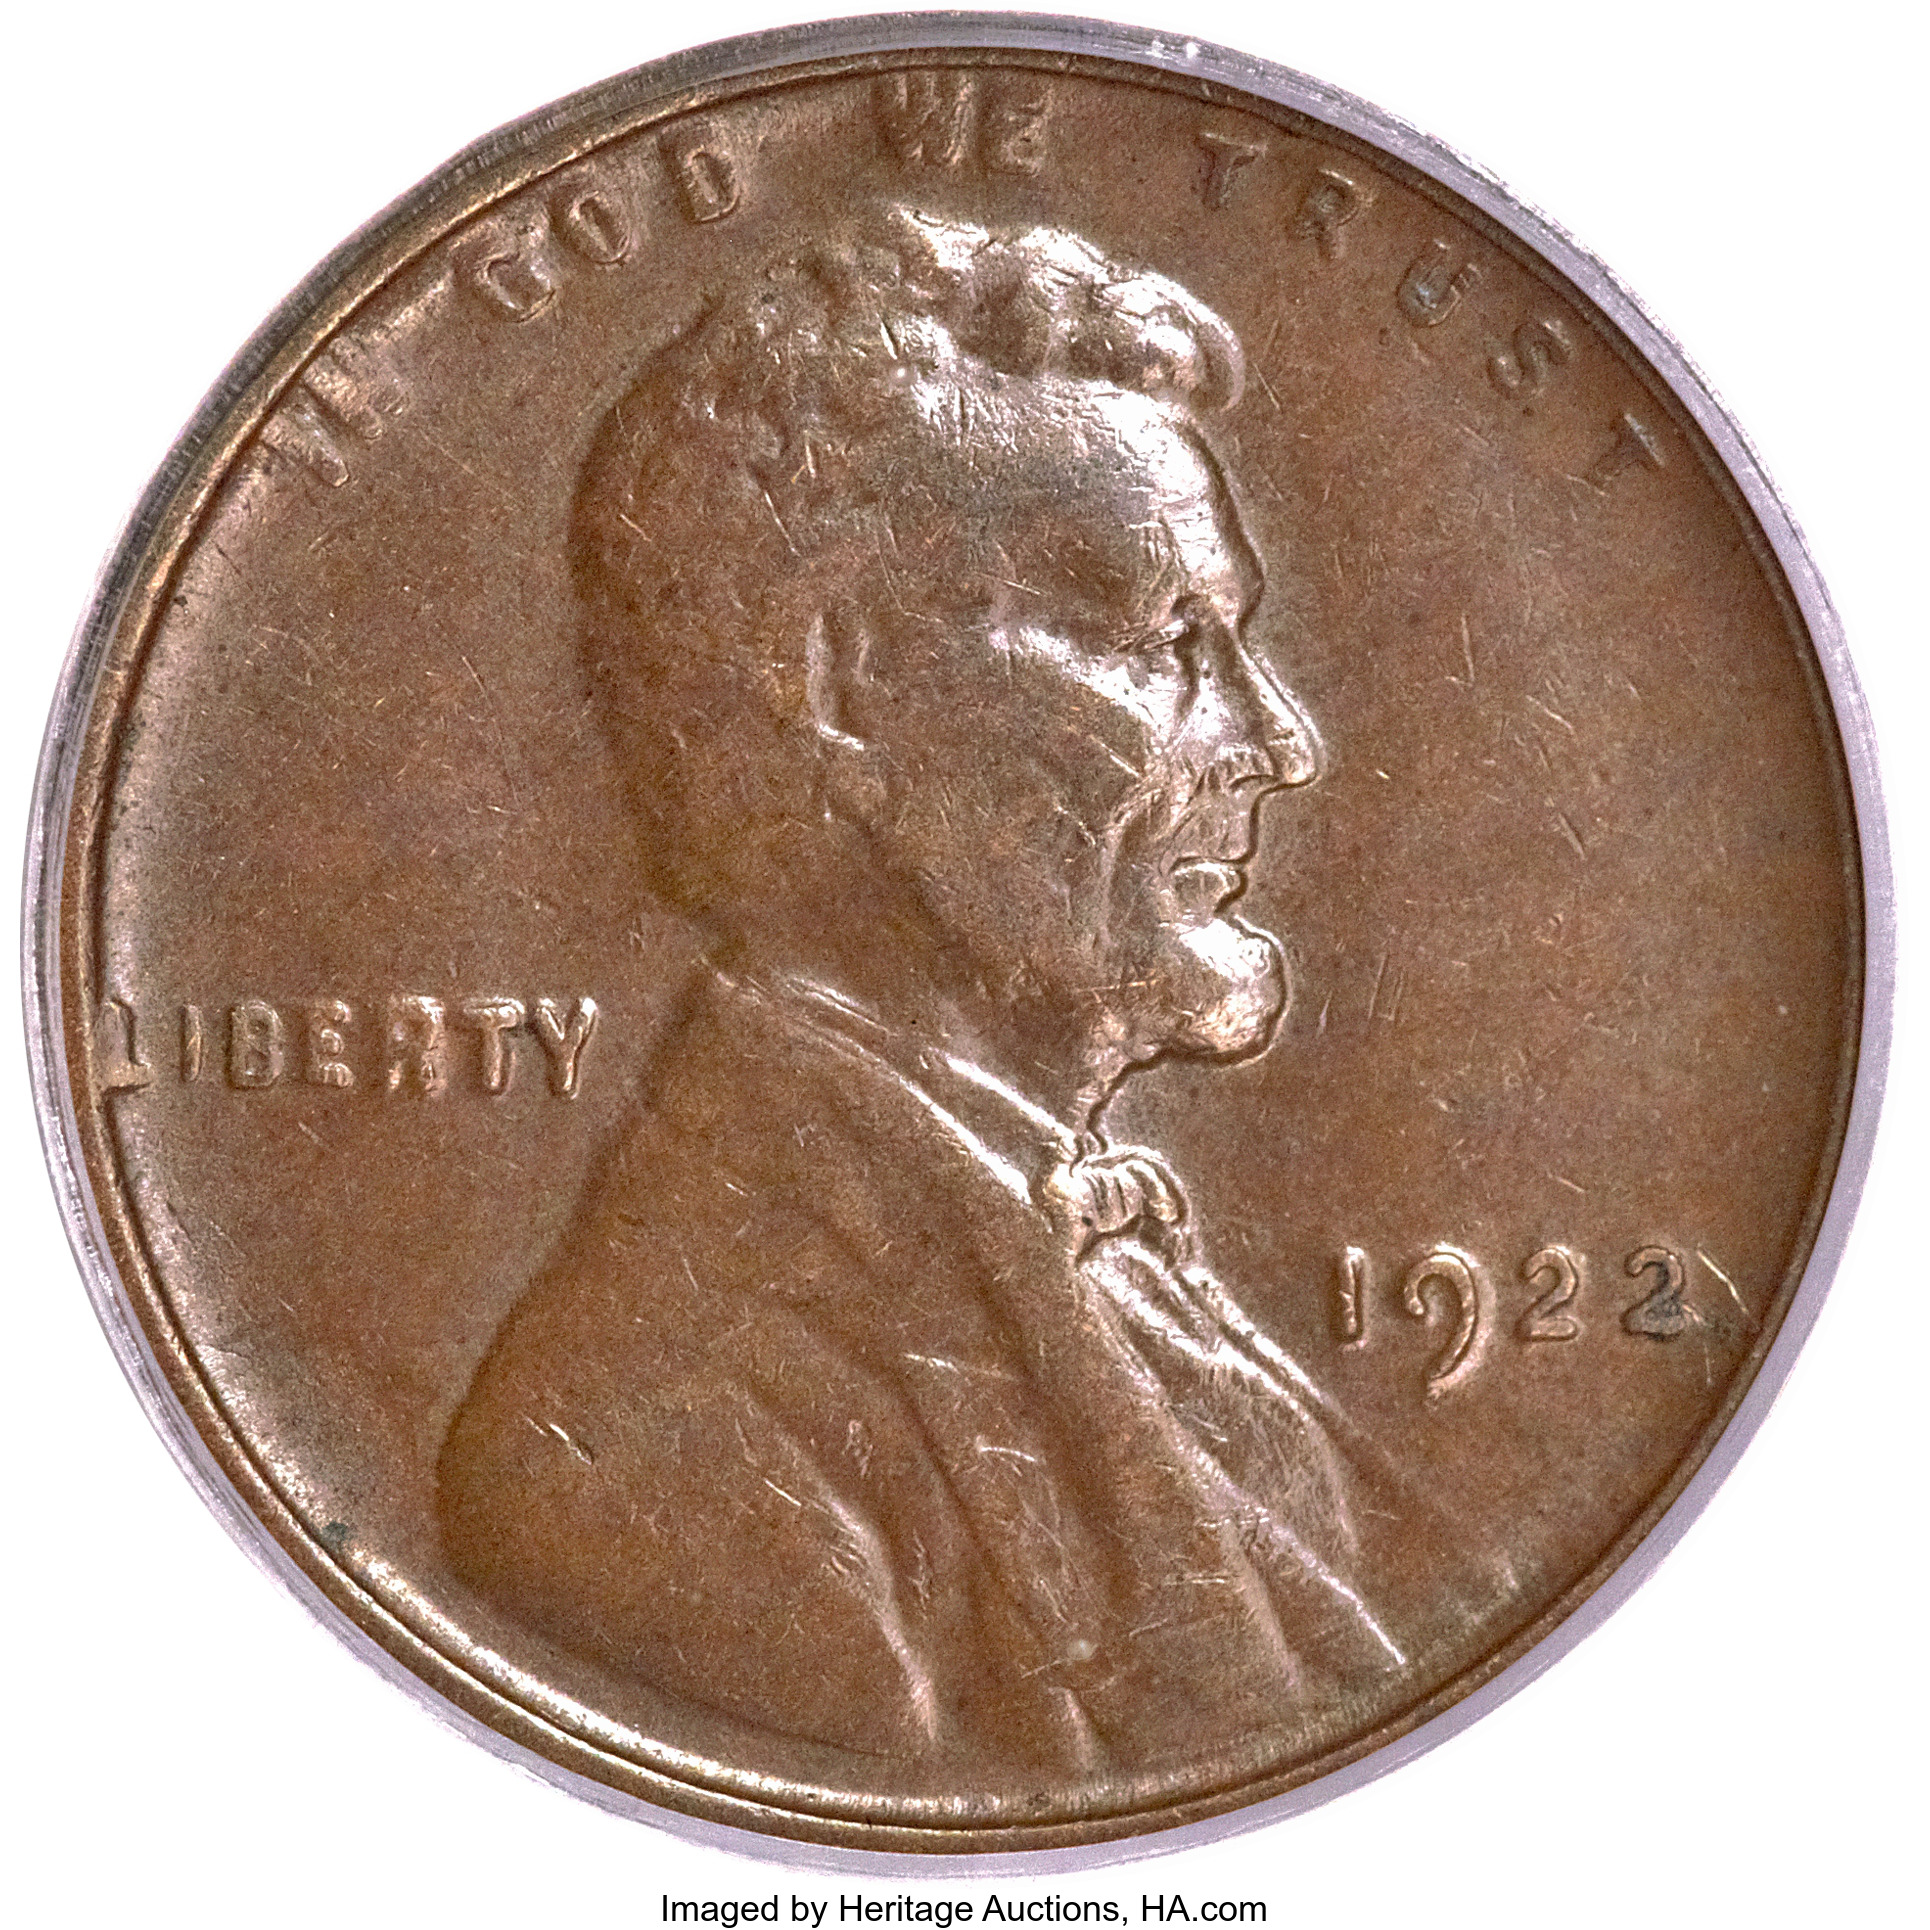 enlarged image for 1922 "Plain" No-D Lincoln Cents: A Closer Look